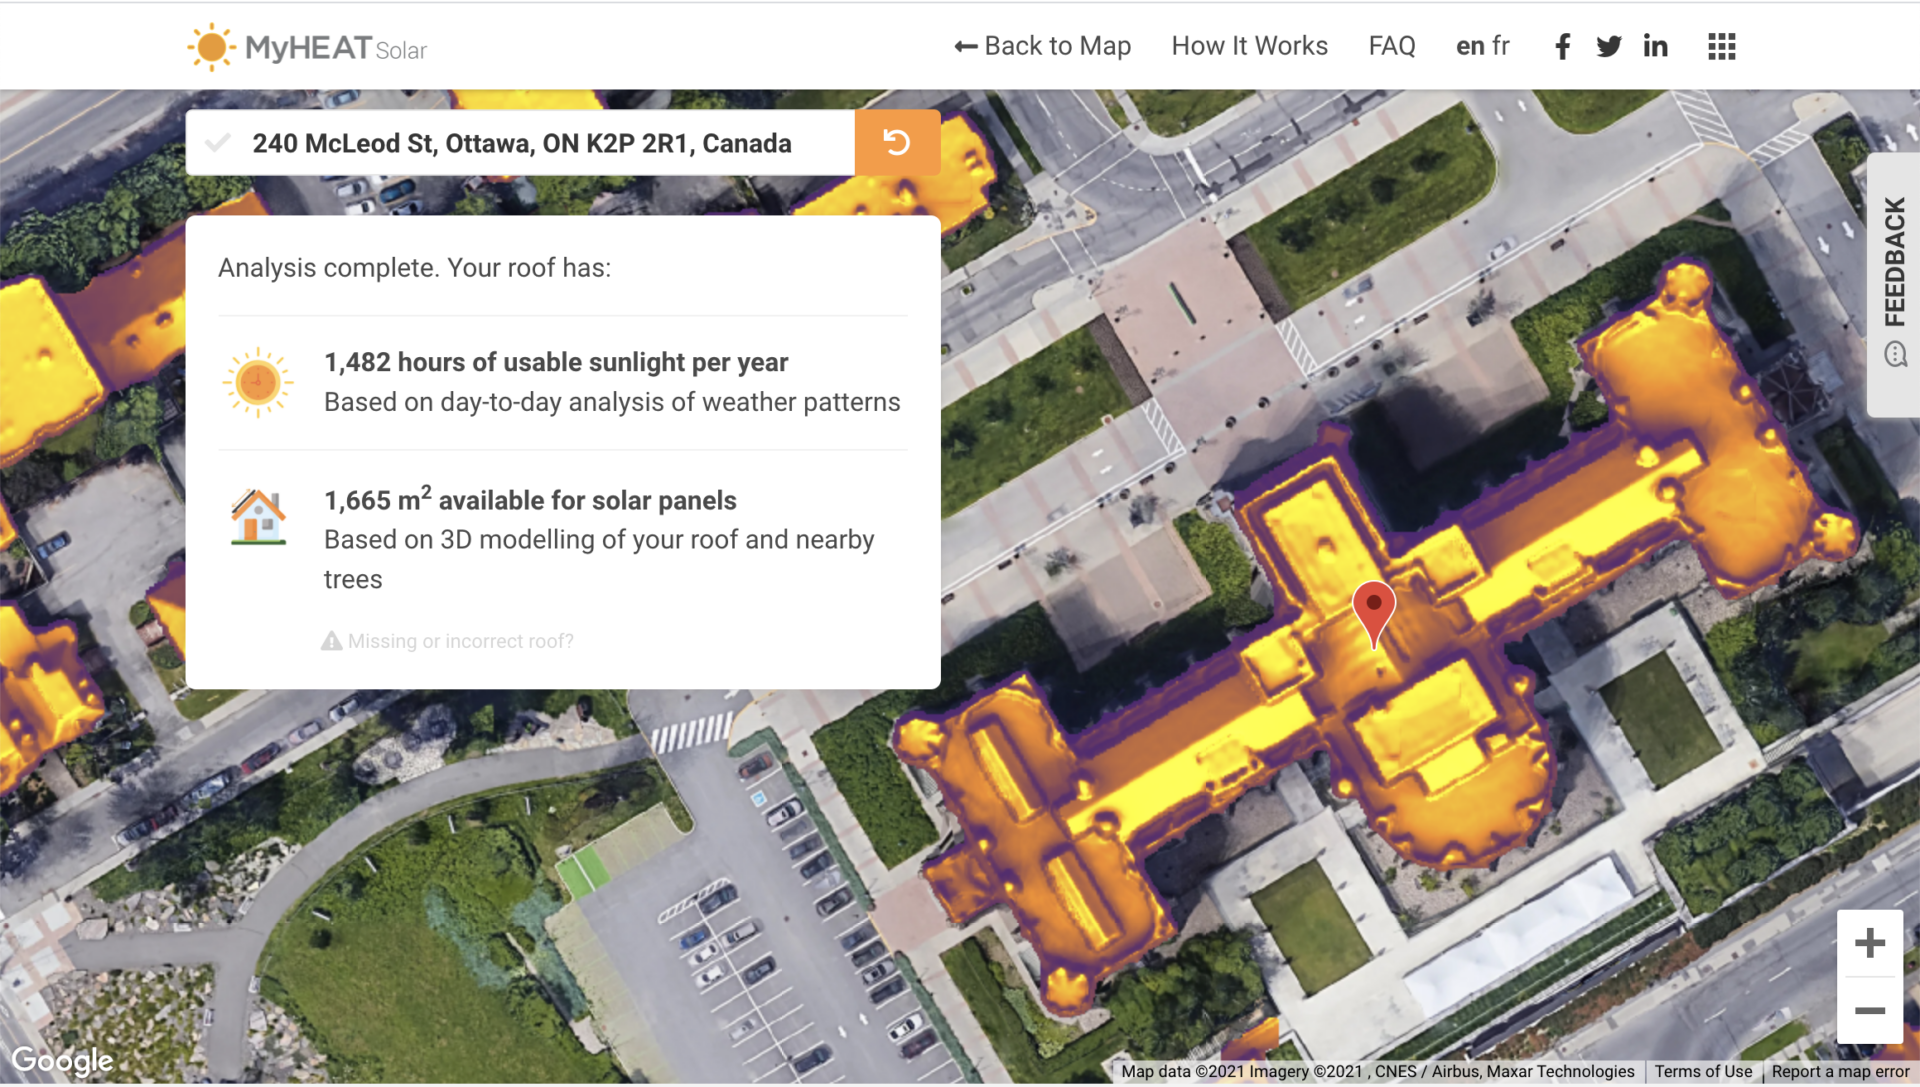 A solar map showing how much sun the roof of the Canadian Museum of Nature building gets at 240 McLeod St, Ottawa, Ontario